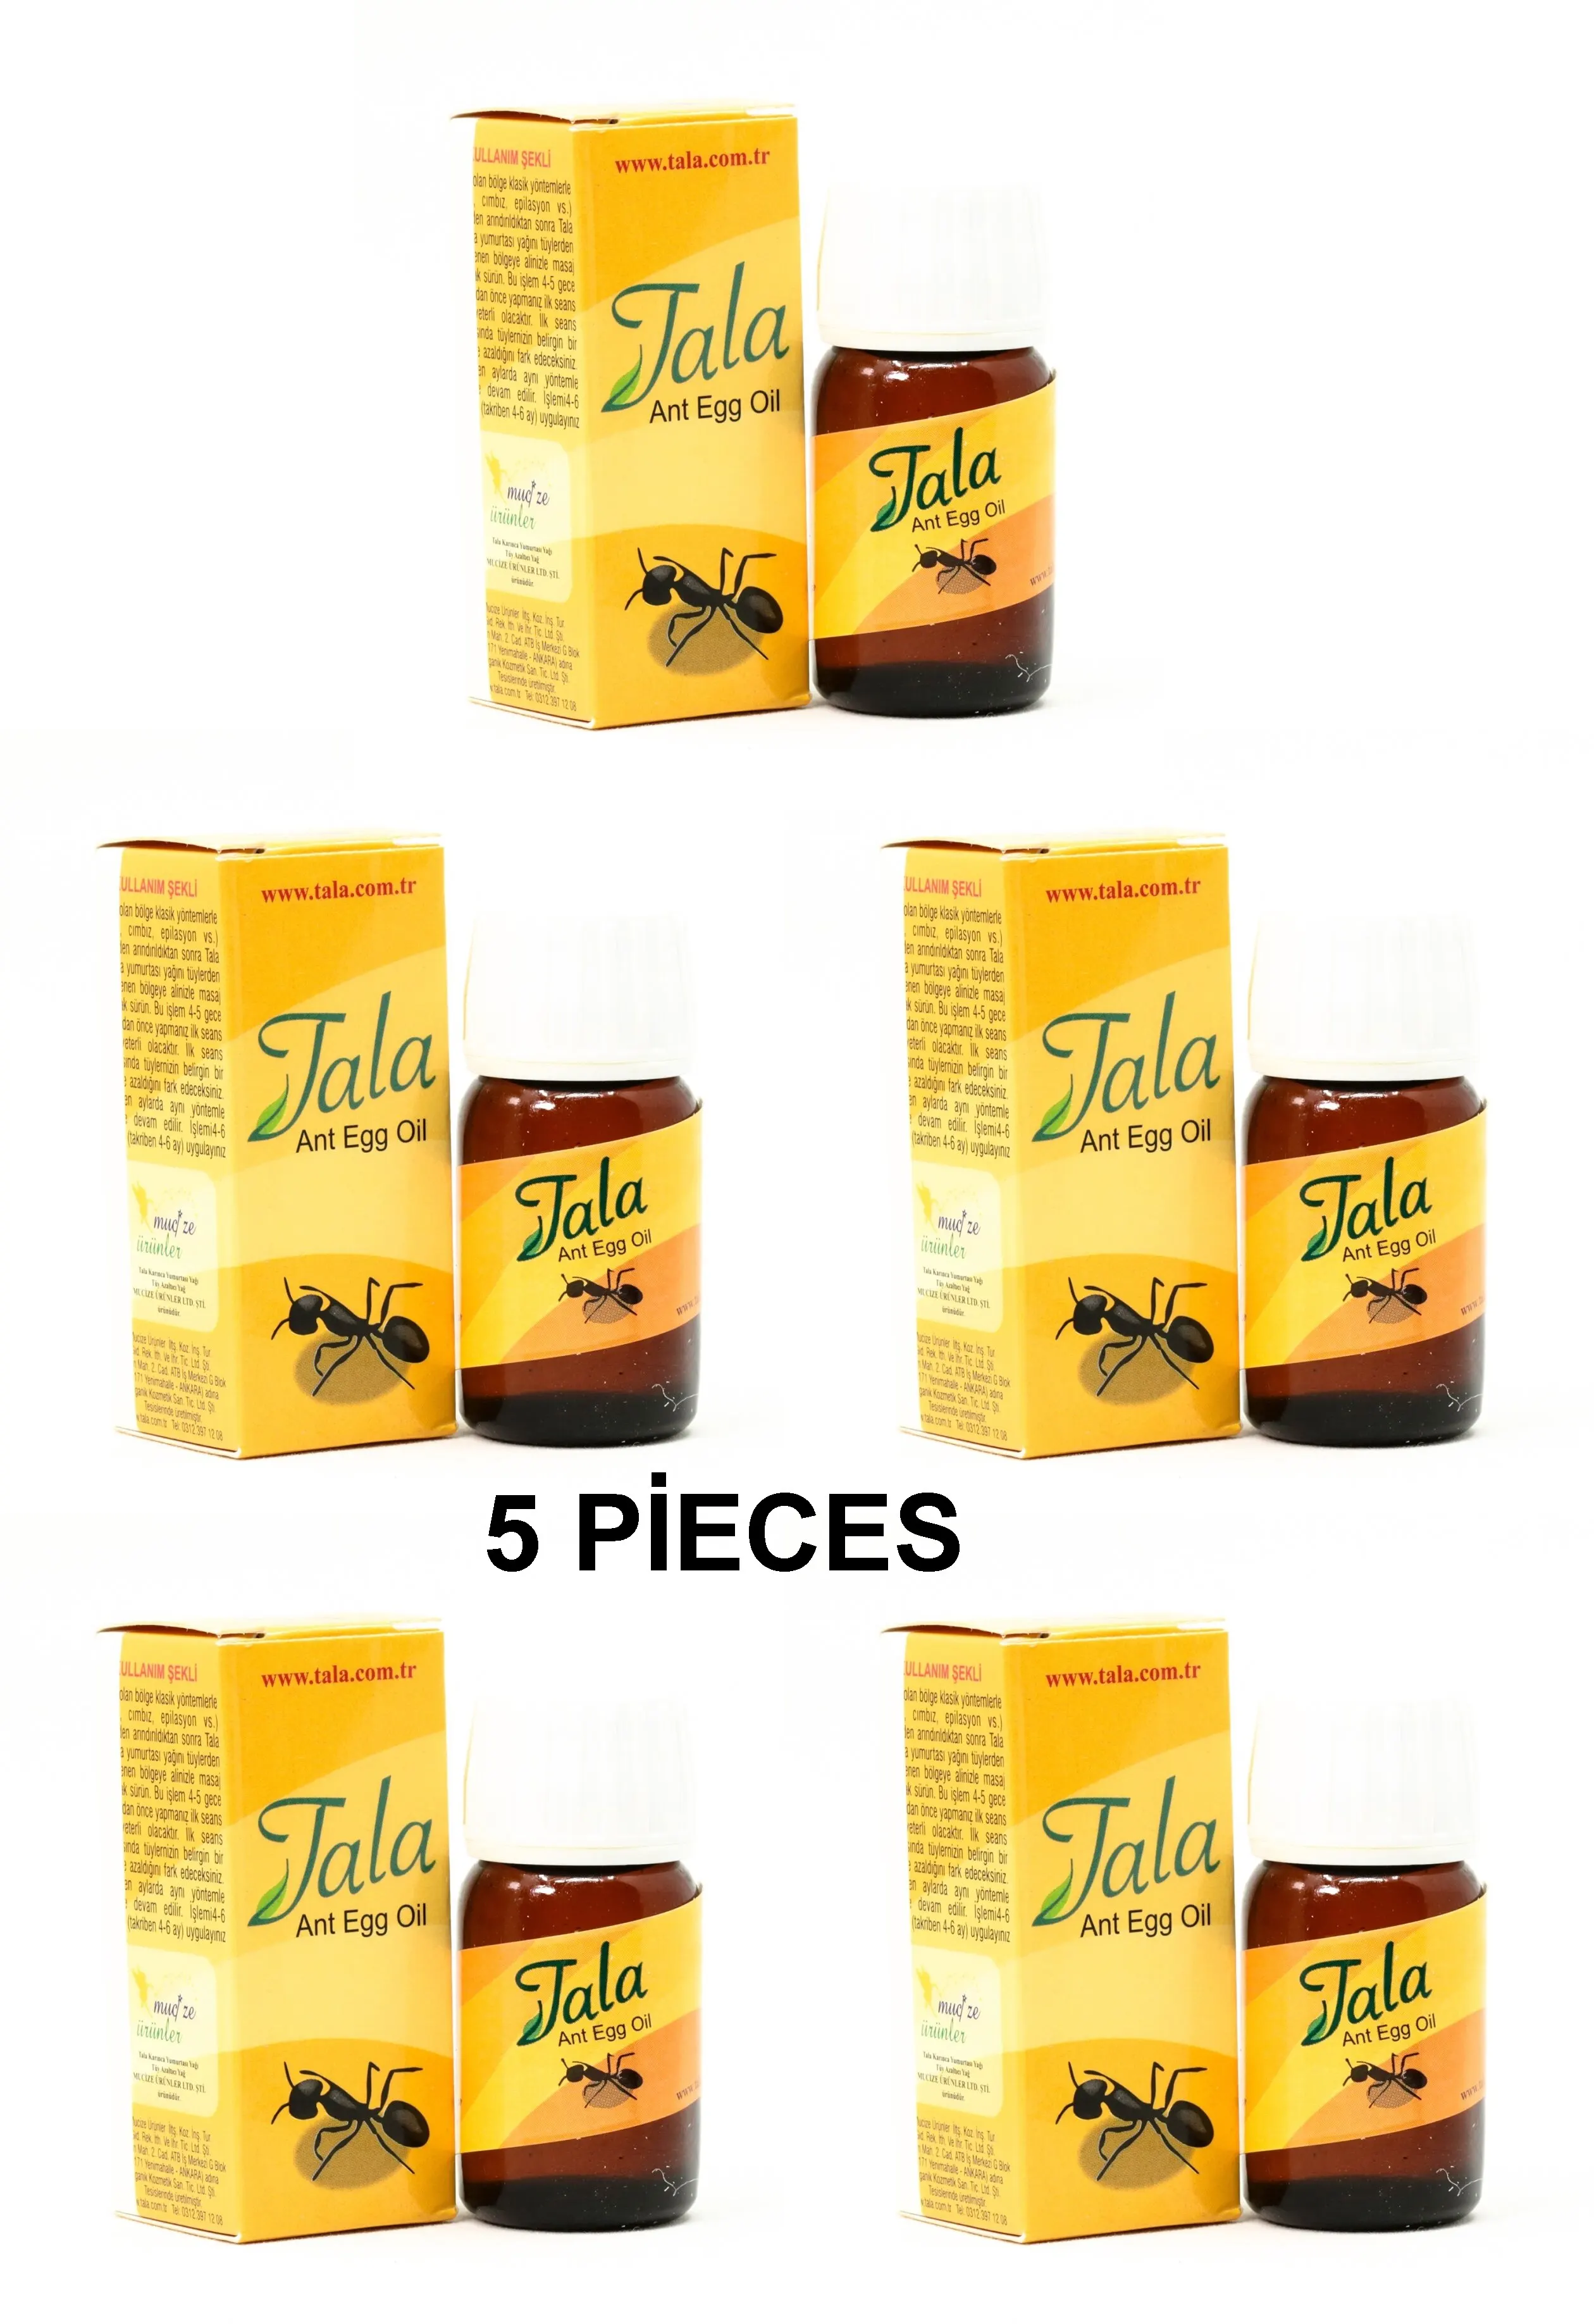 

5 pieces of 100% original Tala ant oil 5 X 20 ml natural organic hair removal, hair reduction. Permanent hair removal